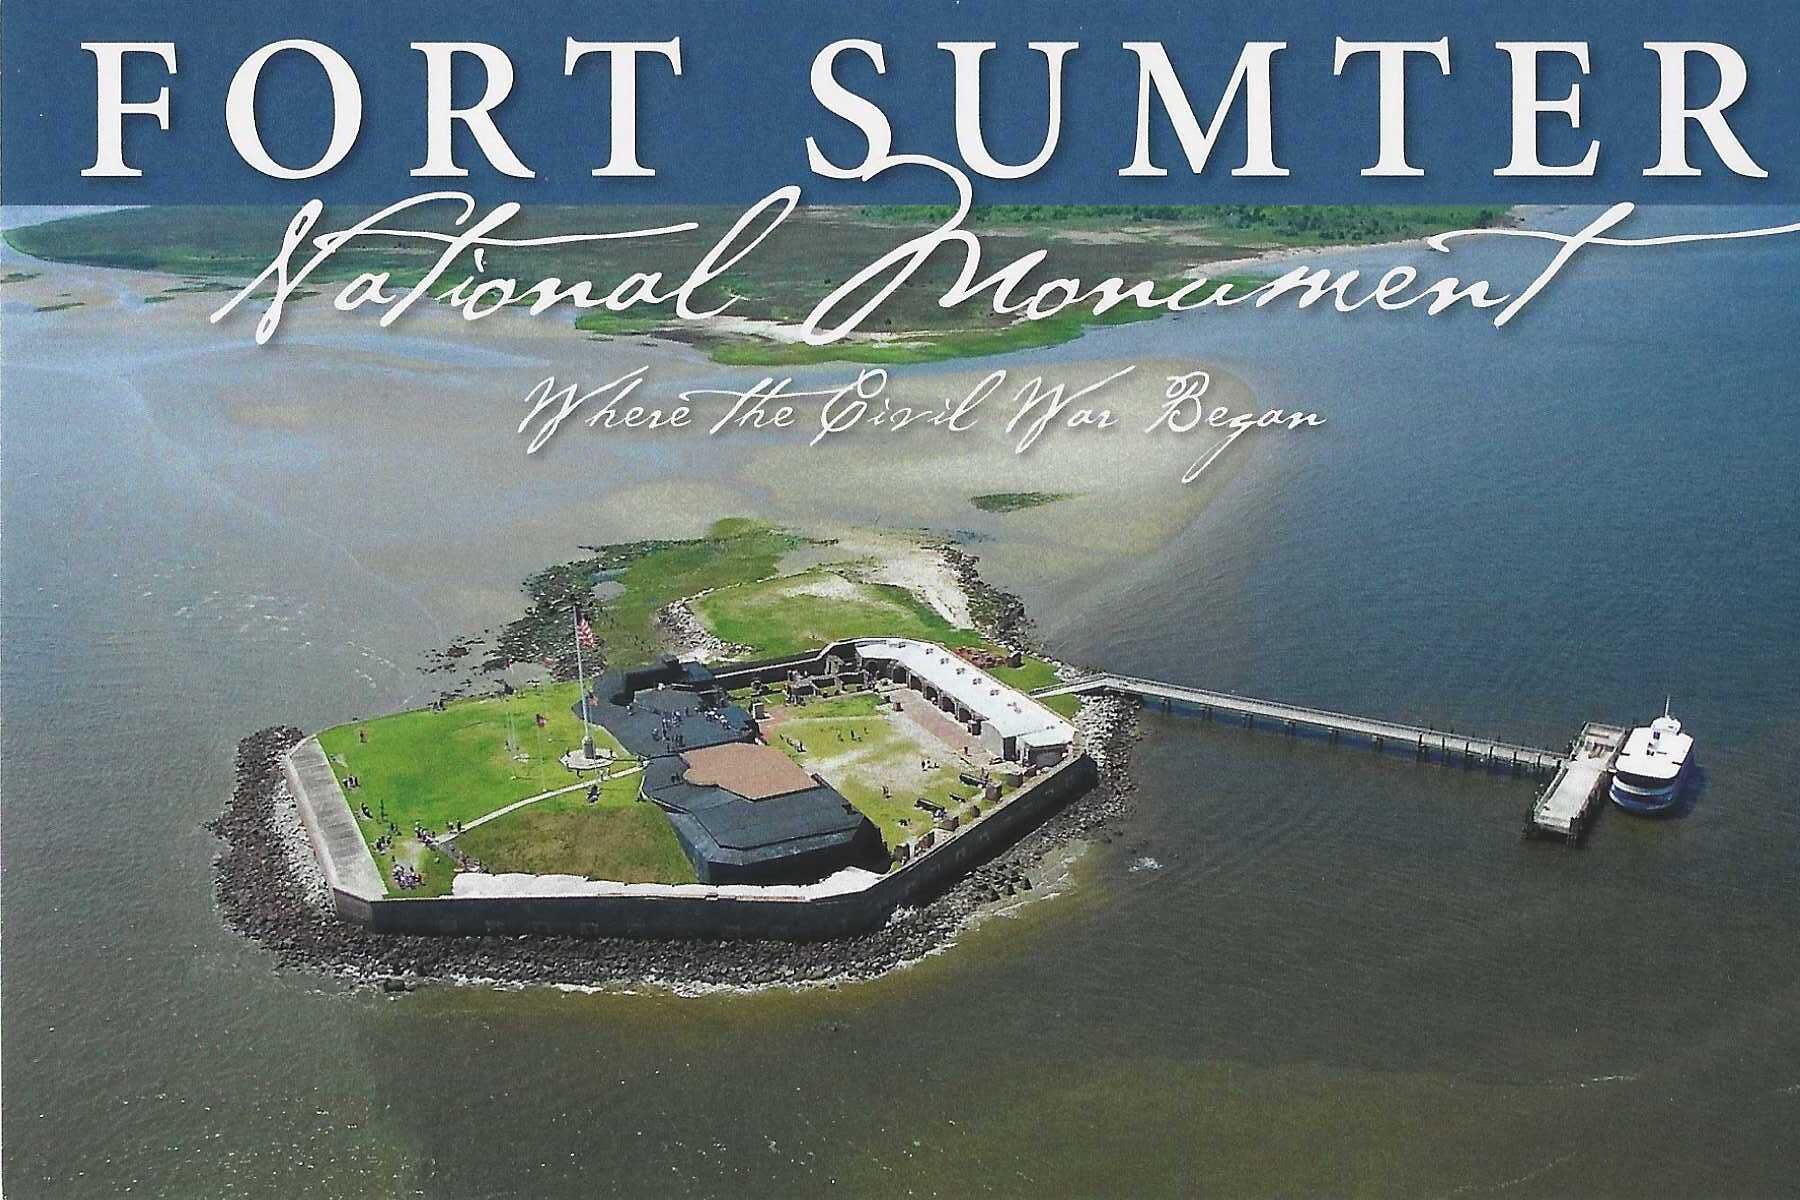 The Battle Of Fort Sumter 160 Years Ago Today — Historic America